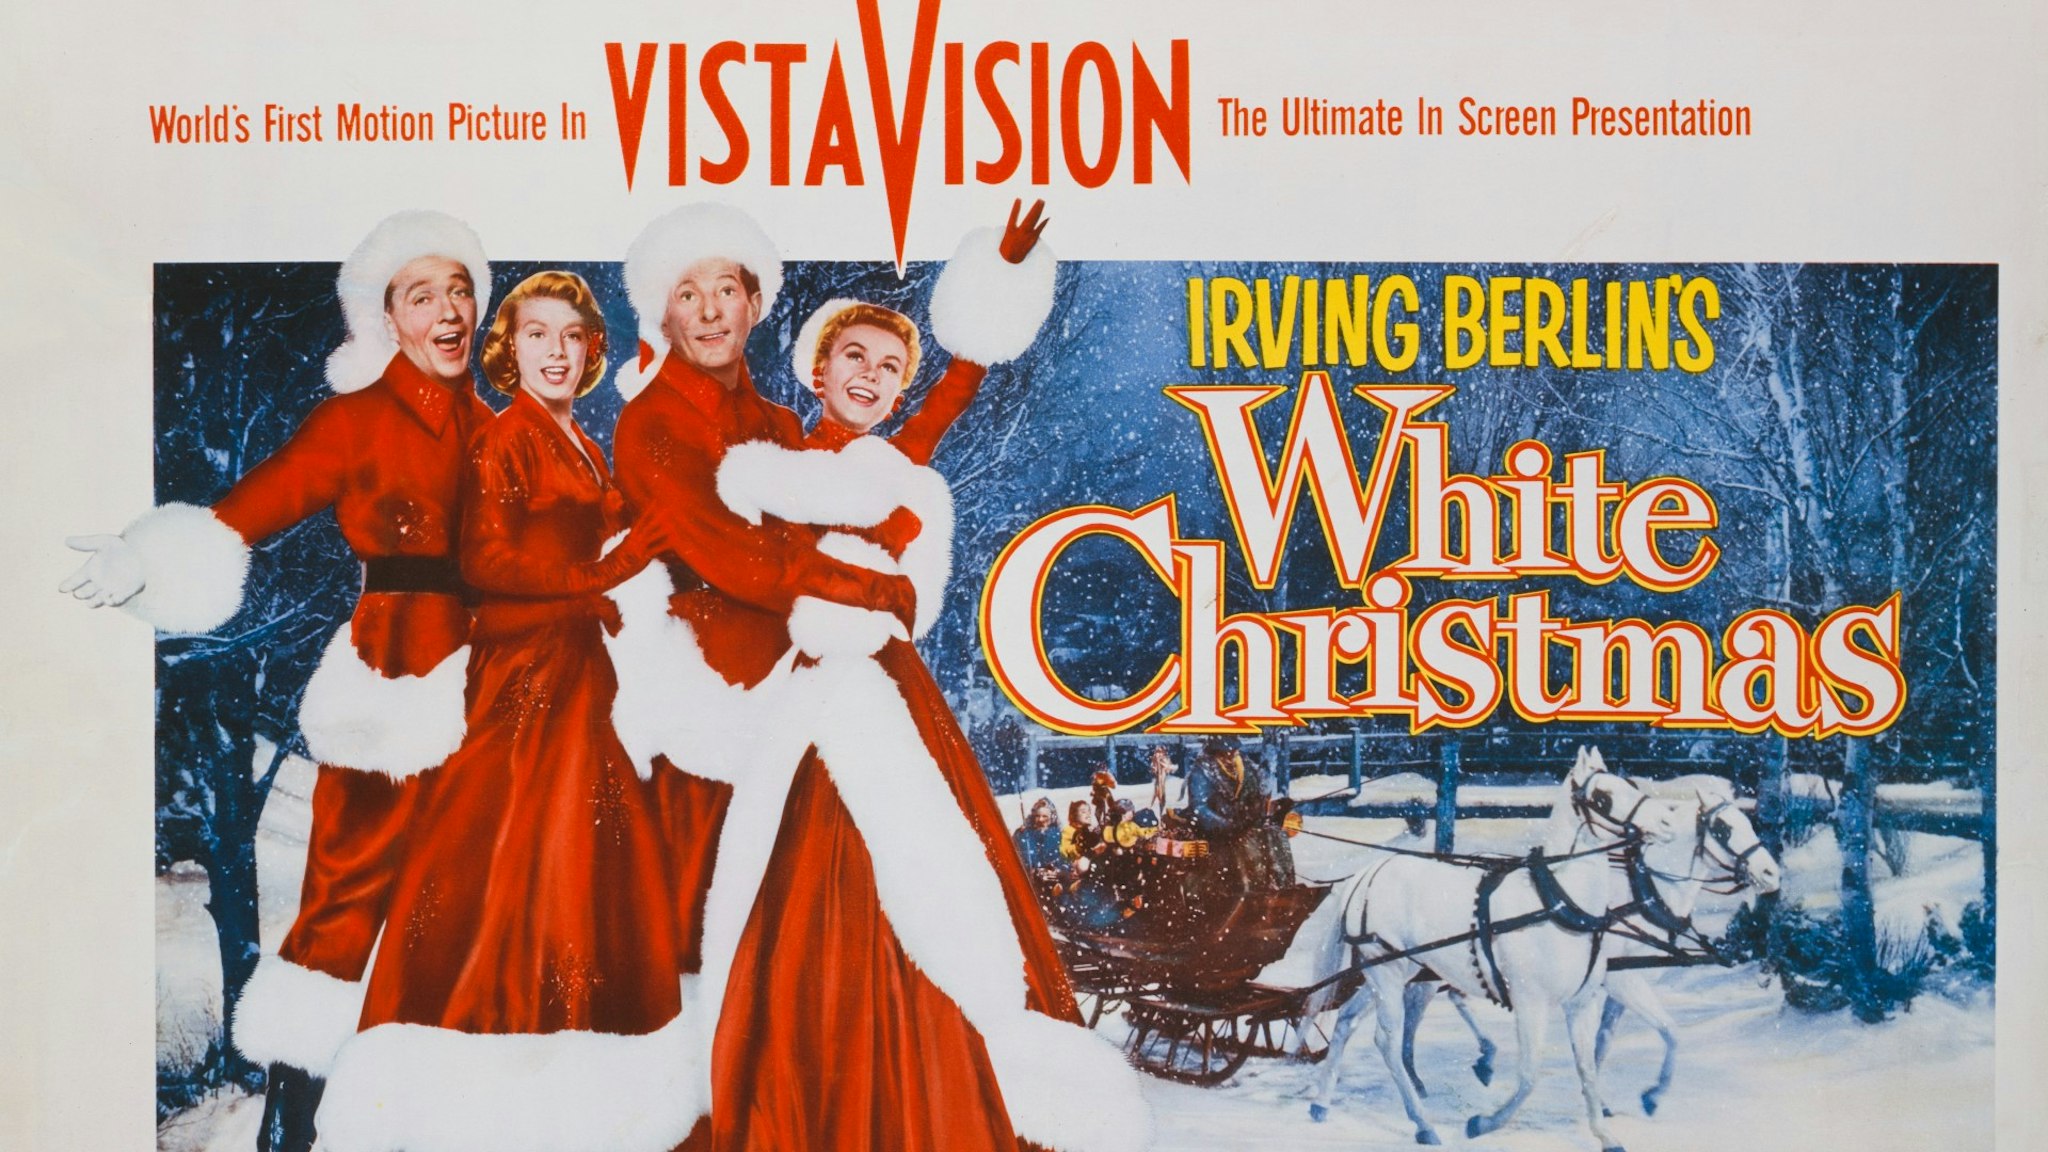 A poster the 1954 musical romantic comedy, 'White Christmas', directed by Michael Curtiz and starring (left to right) Bing Crosby, Rosemary Clooney, Danny Kaye and Vera-Ellen.